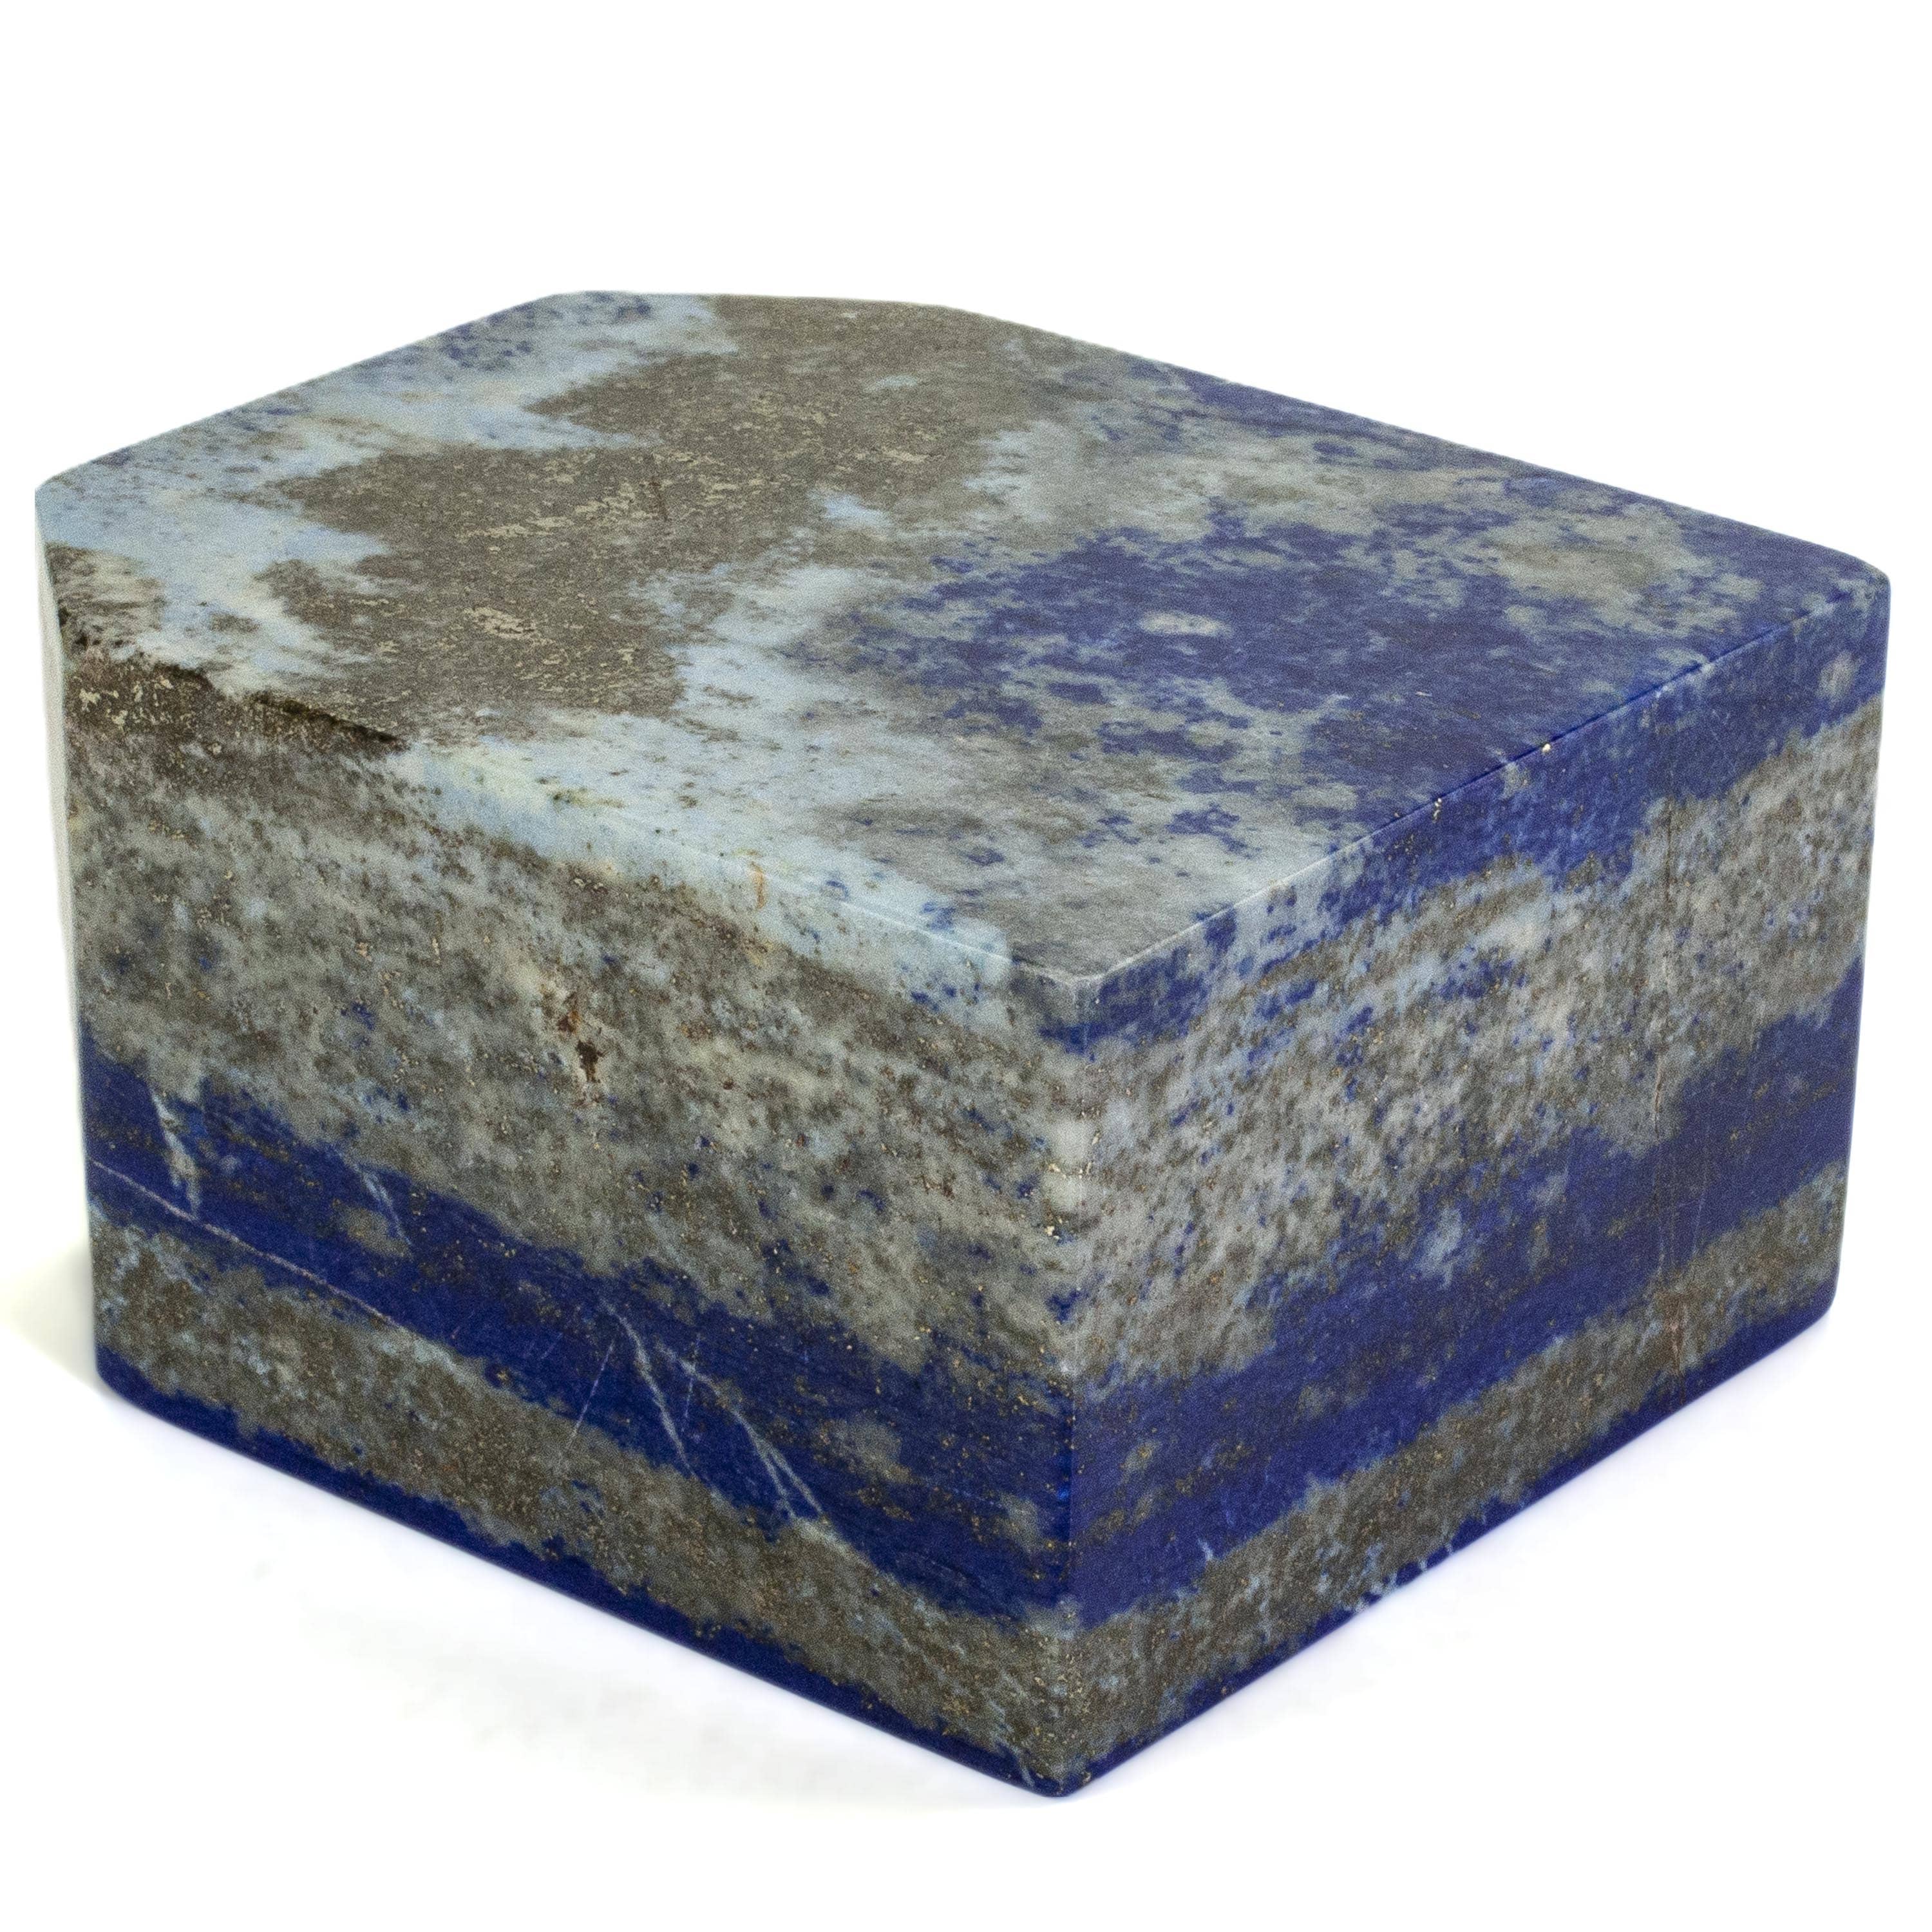 Kalifano Lapis Lapis Lazuil Freeform from Afghanistan - 580 g / 1.3 lbs LP700.008